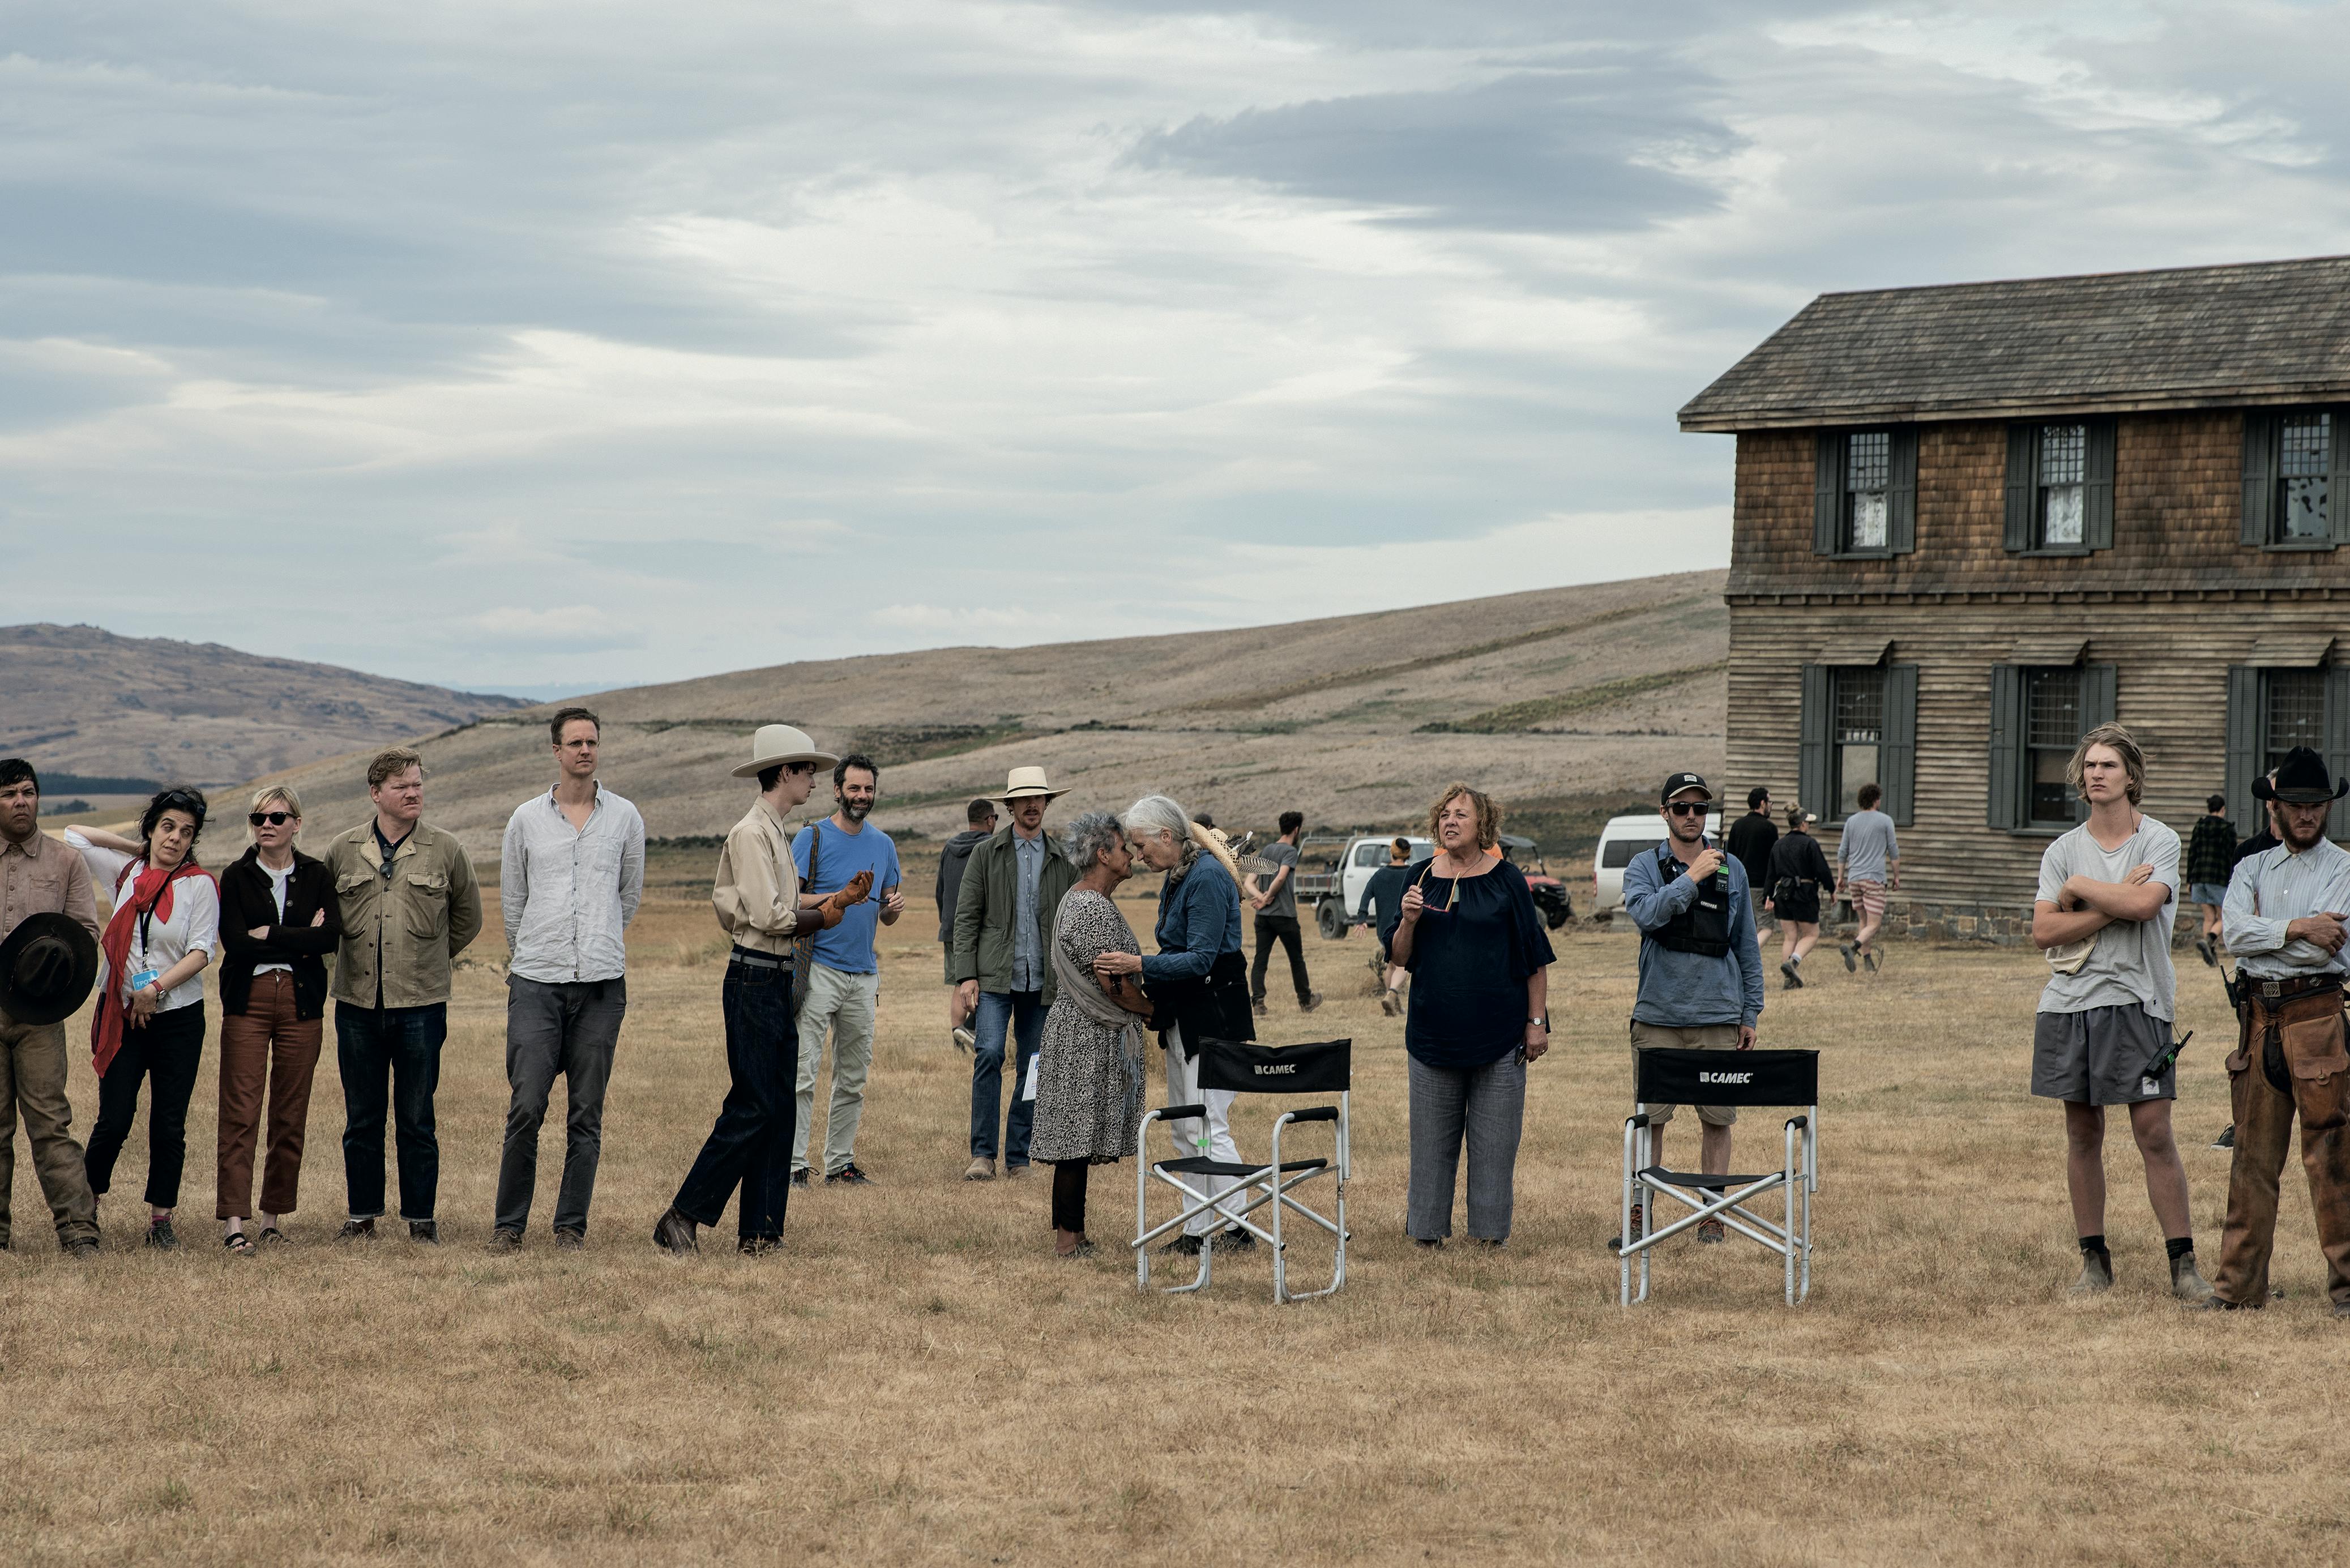 Max Mata as Juan, Kirsten Dunst as Rose Gordon, Jesse Plemons as George Burbank, Kodi Smit-McPhee as Peter, Benedict Cumberbatch as Phil Burbank, Jane Campion (Director, Producer), Josh Owen as Lee in The Power of the Dog. Everyone stand on the set of The Power of the Dog as they bless the site with a member of the inuit community in New Zealand.